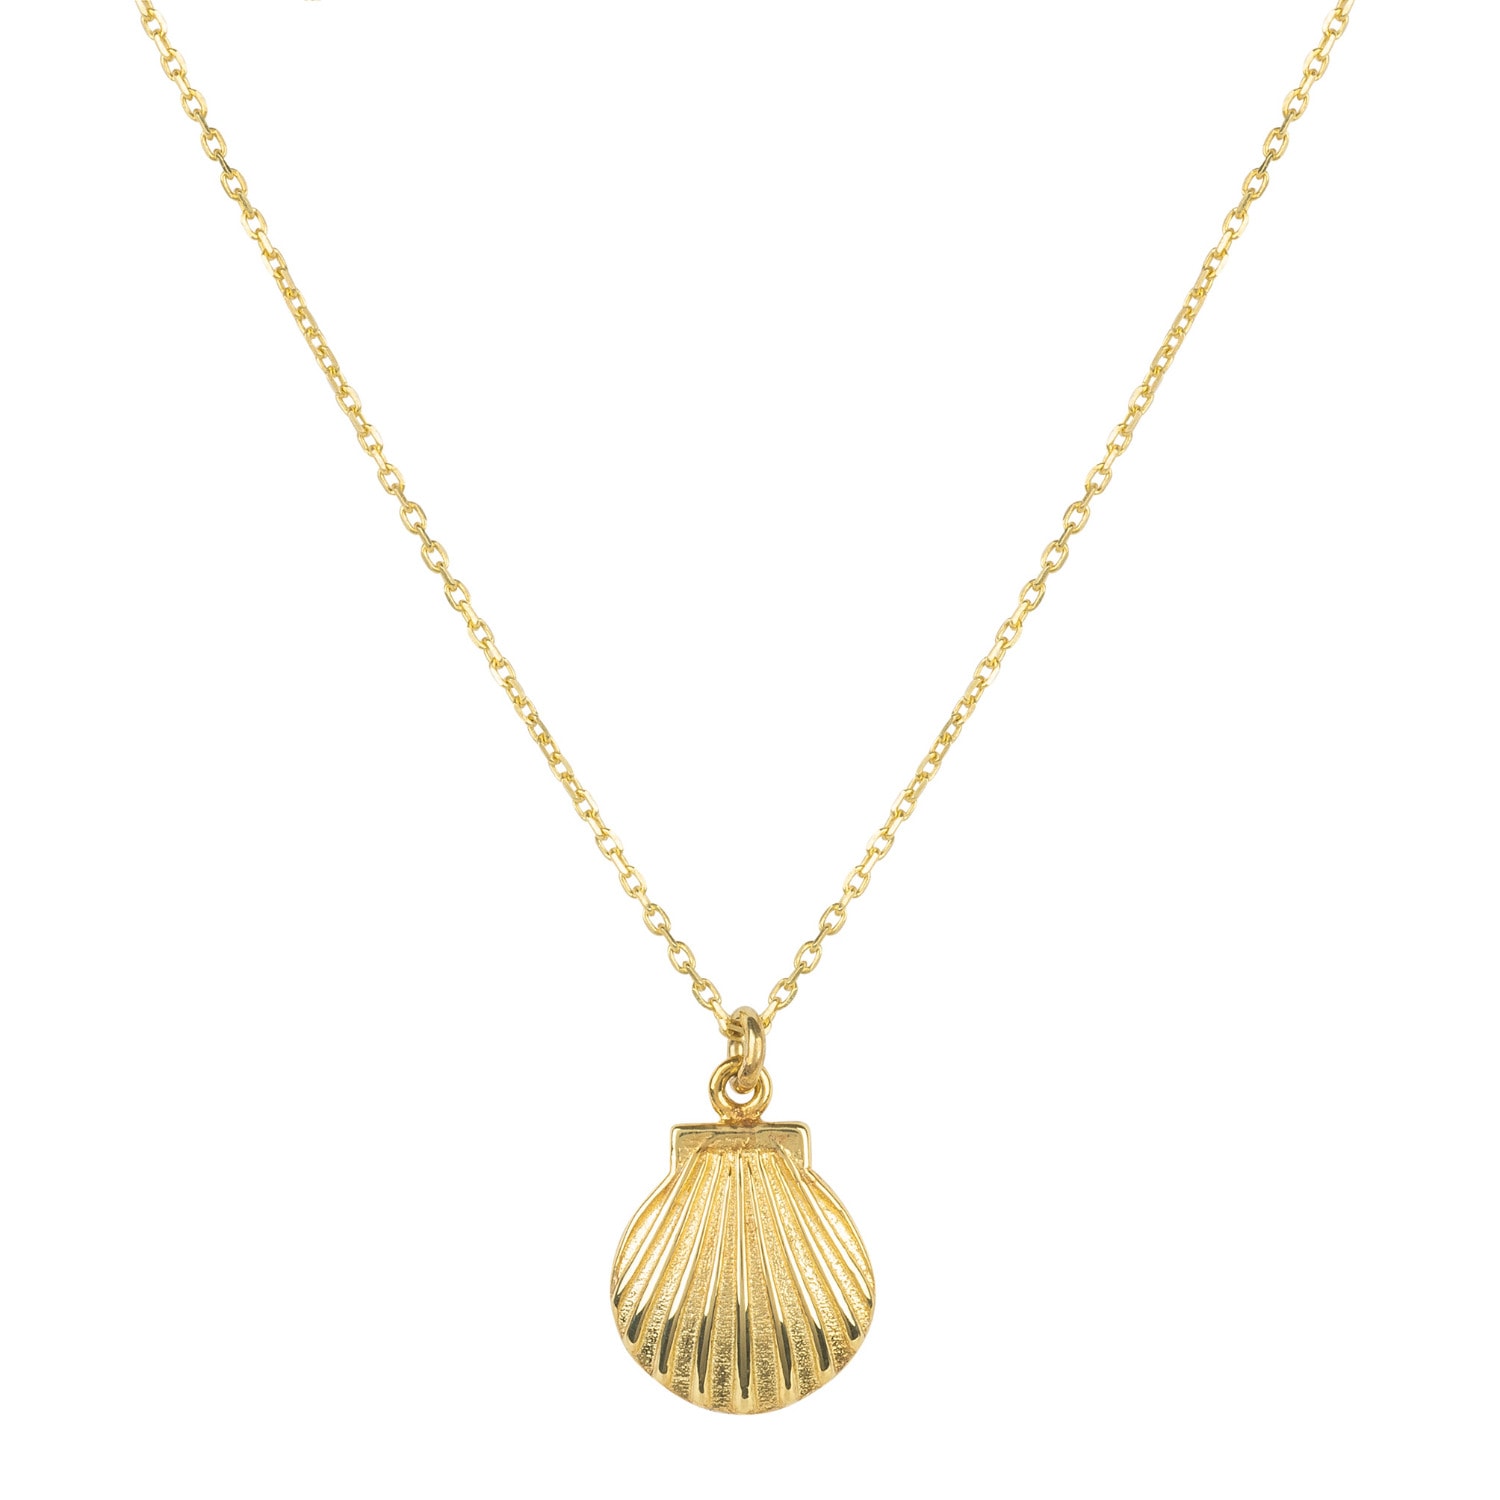 Women's Cast Scallop Shell Shaped Mini Sterling Silver Necklace In Gold Plating LATELITA